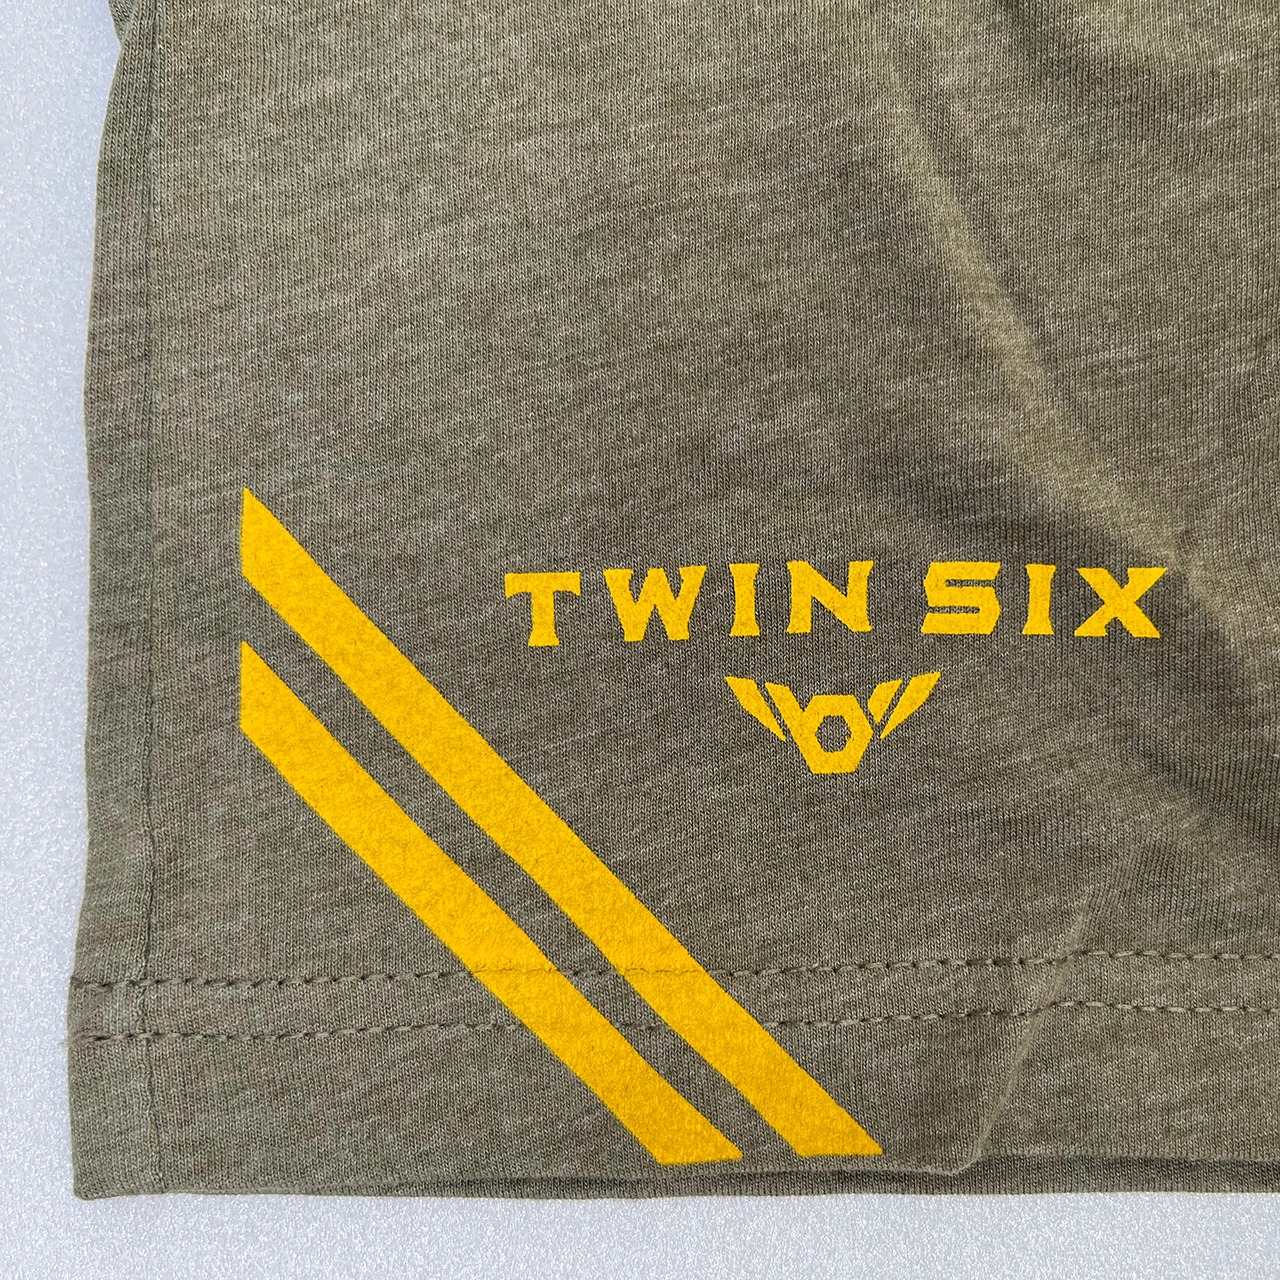 Twin Six ｜Classic Spring T（Olive）